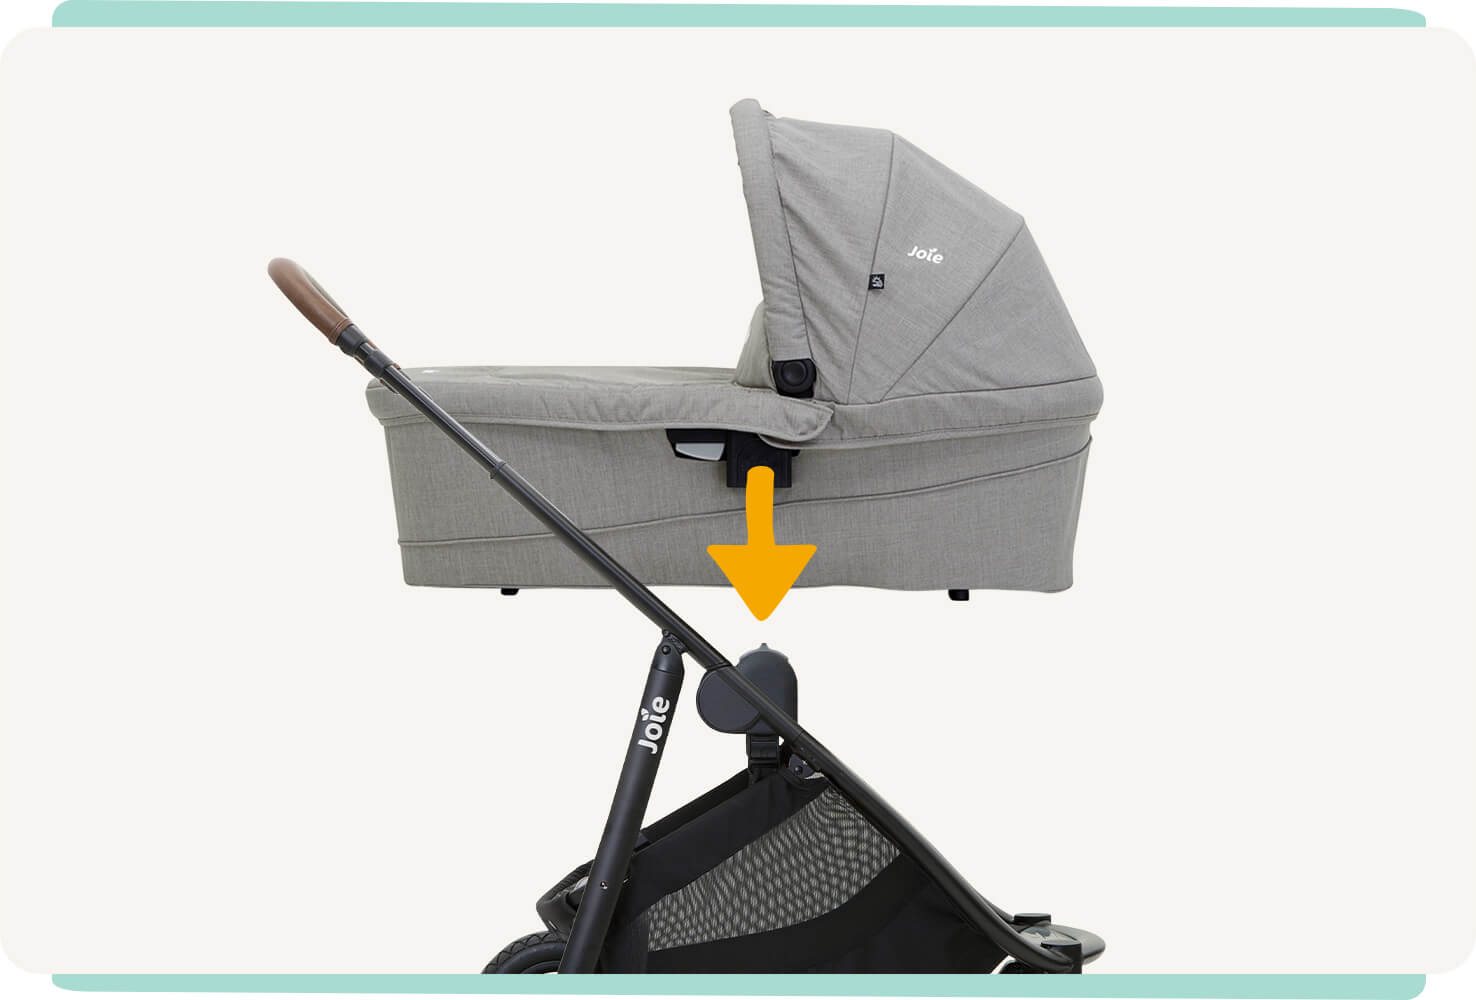  Joie Ramble xl carry cot in light grey sitting on pushchair.
A downward orange arrows display this feature.